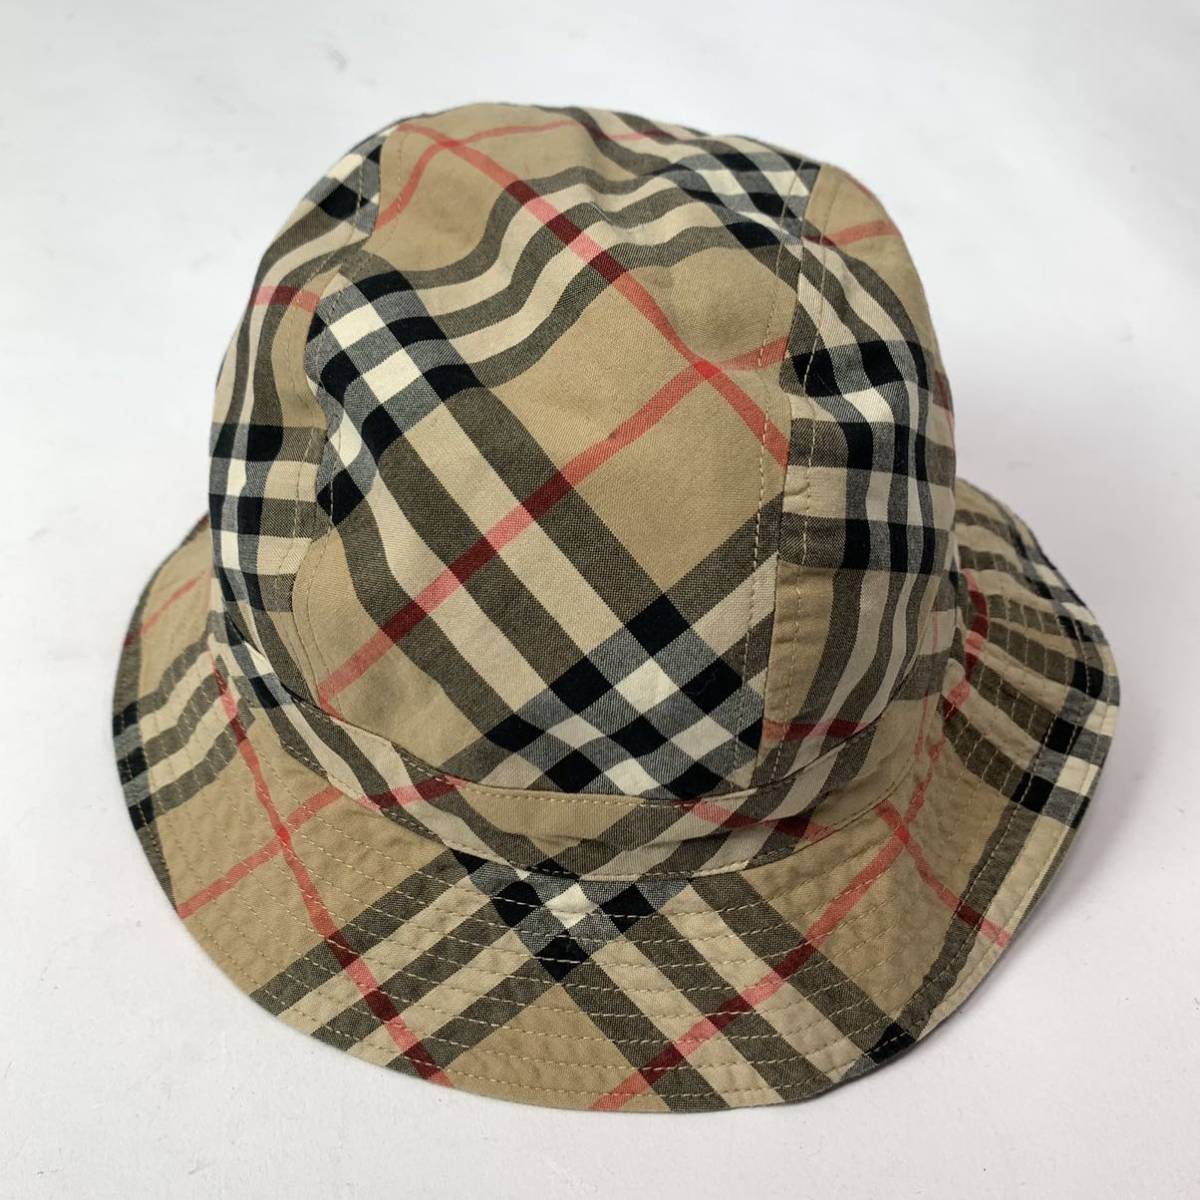 h98 BURBERRY バーバリー ハット チェック柄 帽子 M コットン100% 綿 ベージュ 正規品 キッズ 子供用 kids 男の子 女の子  兼用 product details | Yahoo! Auctions Japan proxy bidding and shopping  service | FROM JAPAN